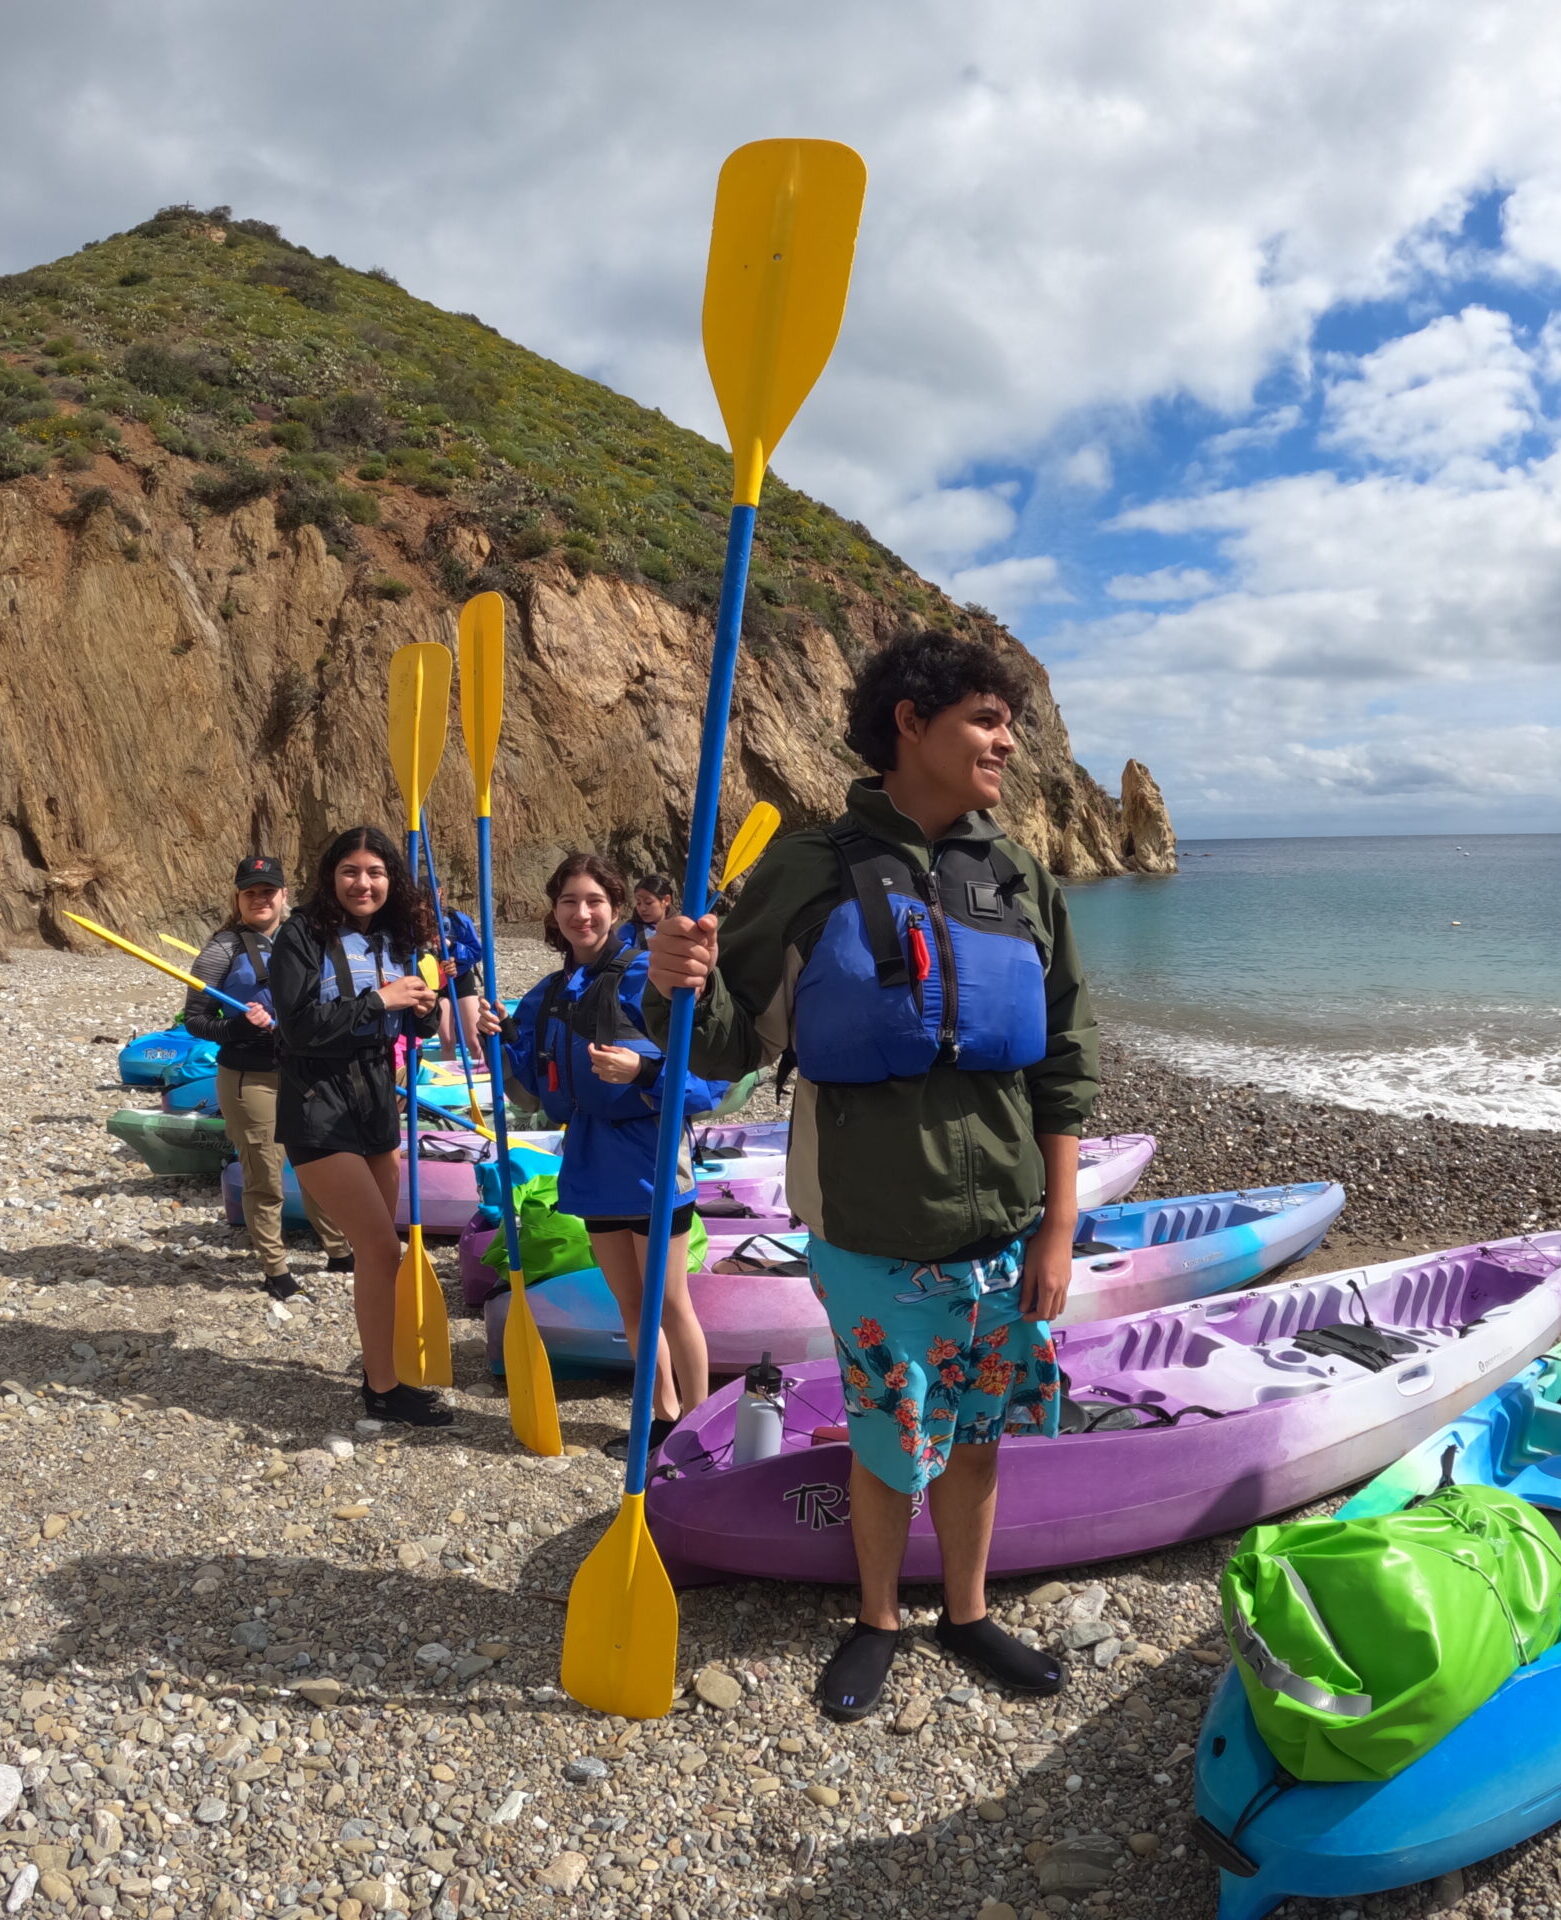 students on the beach getting ready to kayak during a field trip in California